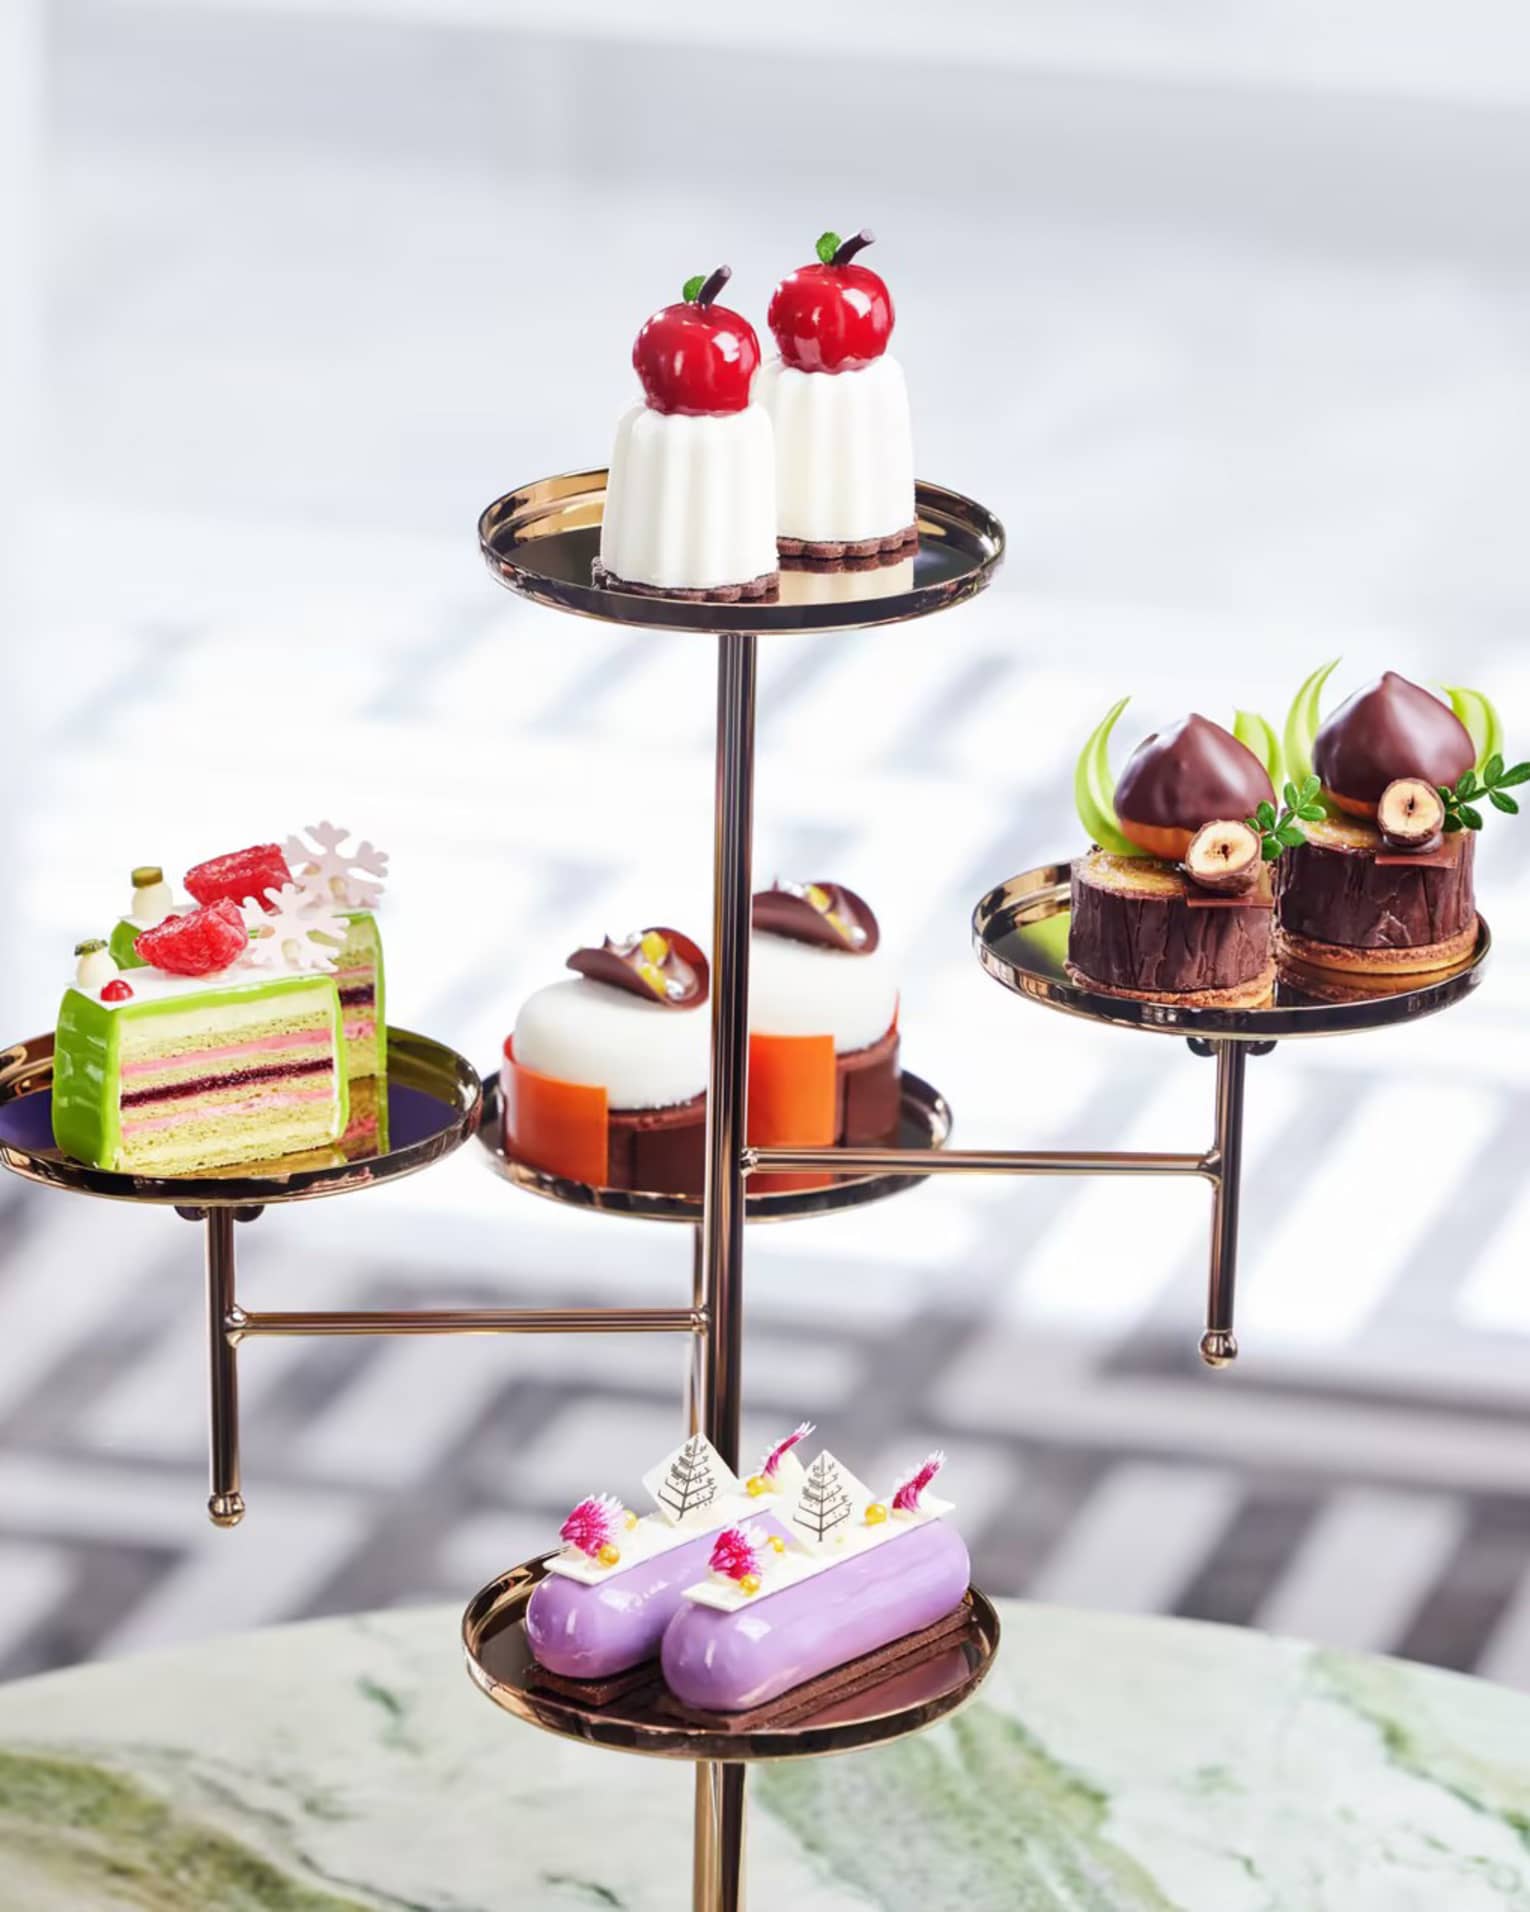 Afternoon tea mini pastries and cakes on a tiered platter